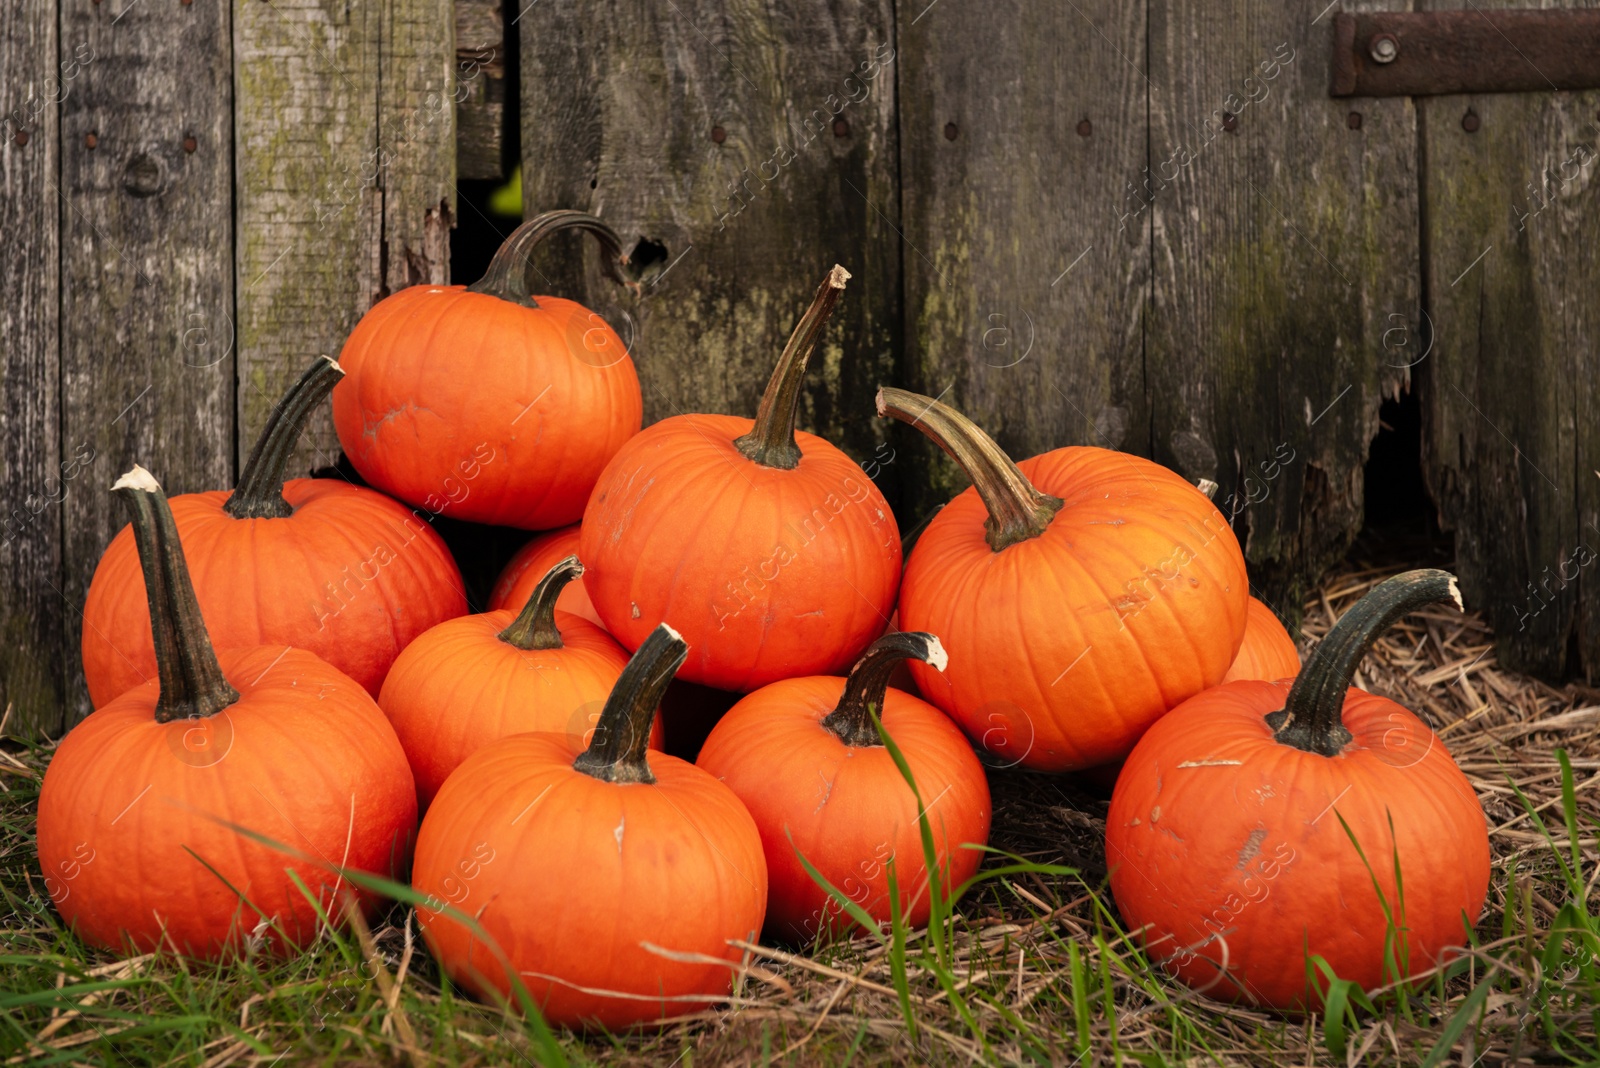 Photo of Many ripe orange pumpkins on grass near wooden fence outdoors